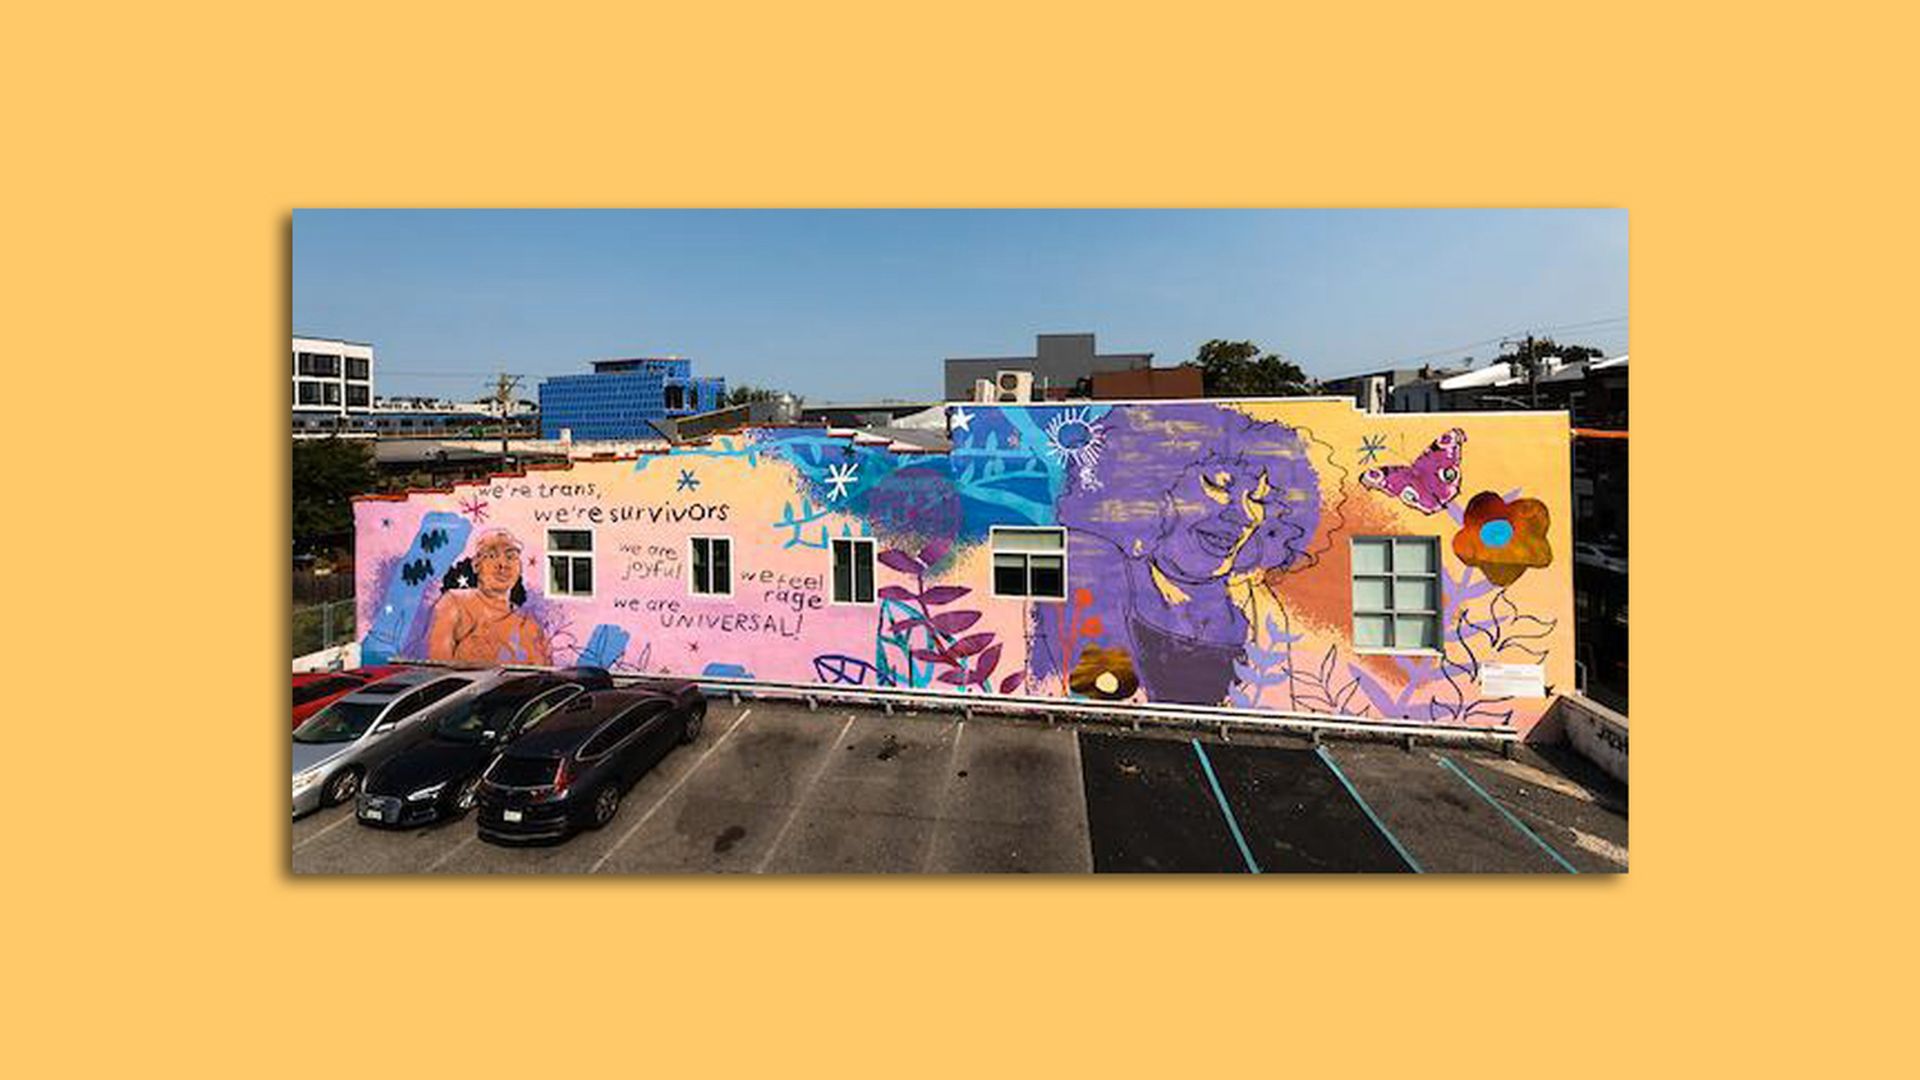 "We Are Universal" is the first mural celebrating trans people in Philadelphia 